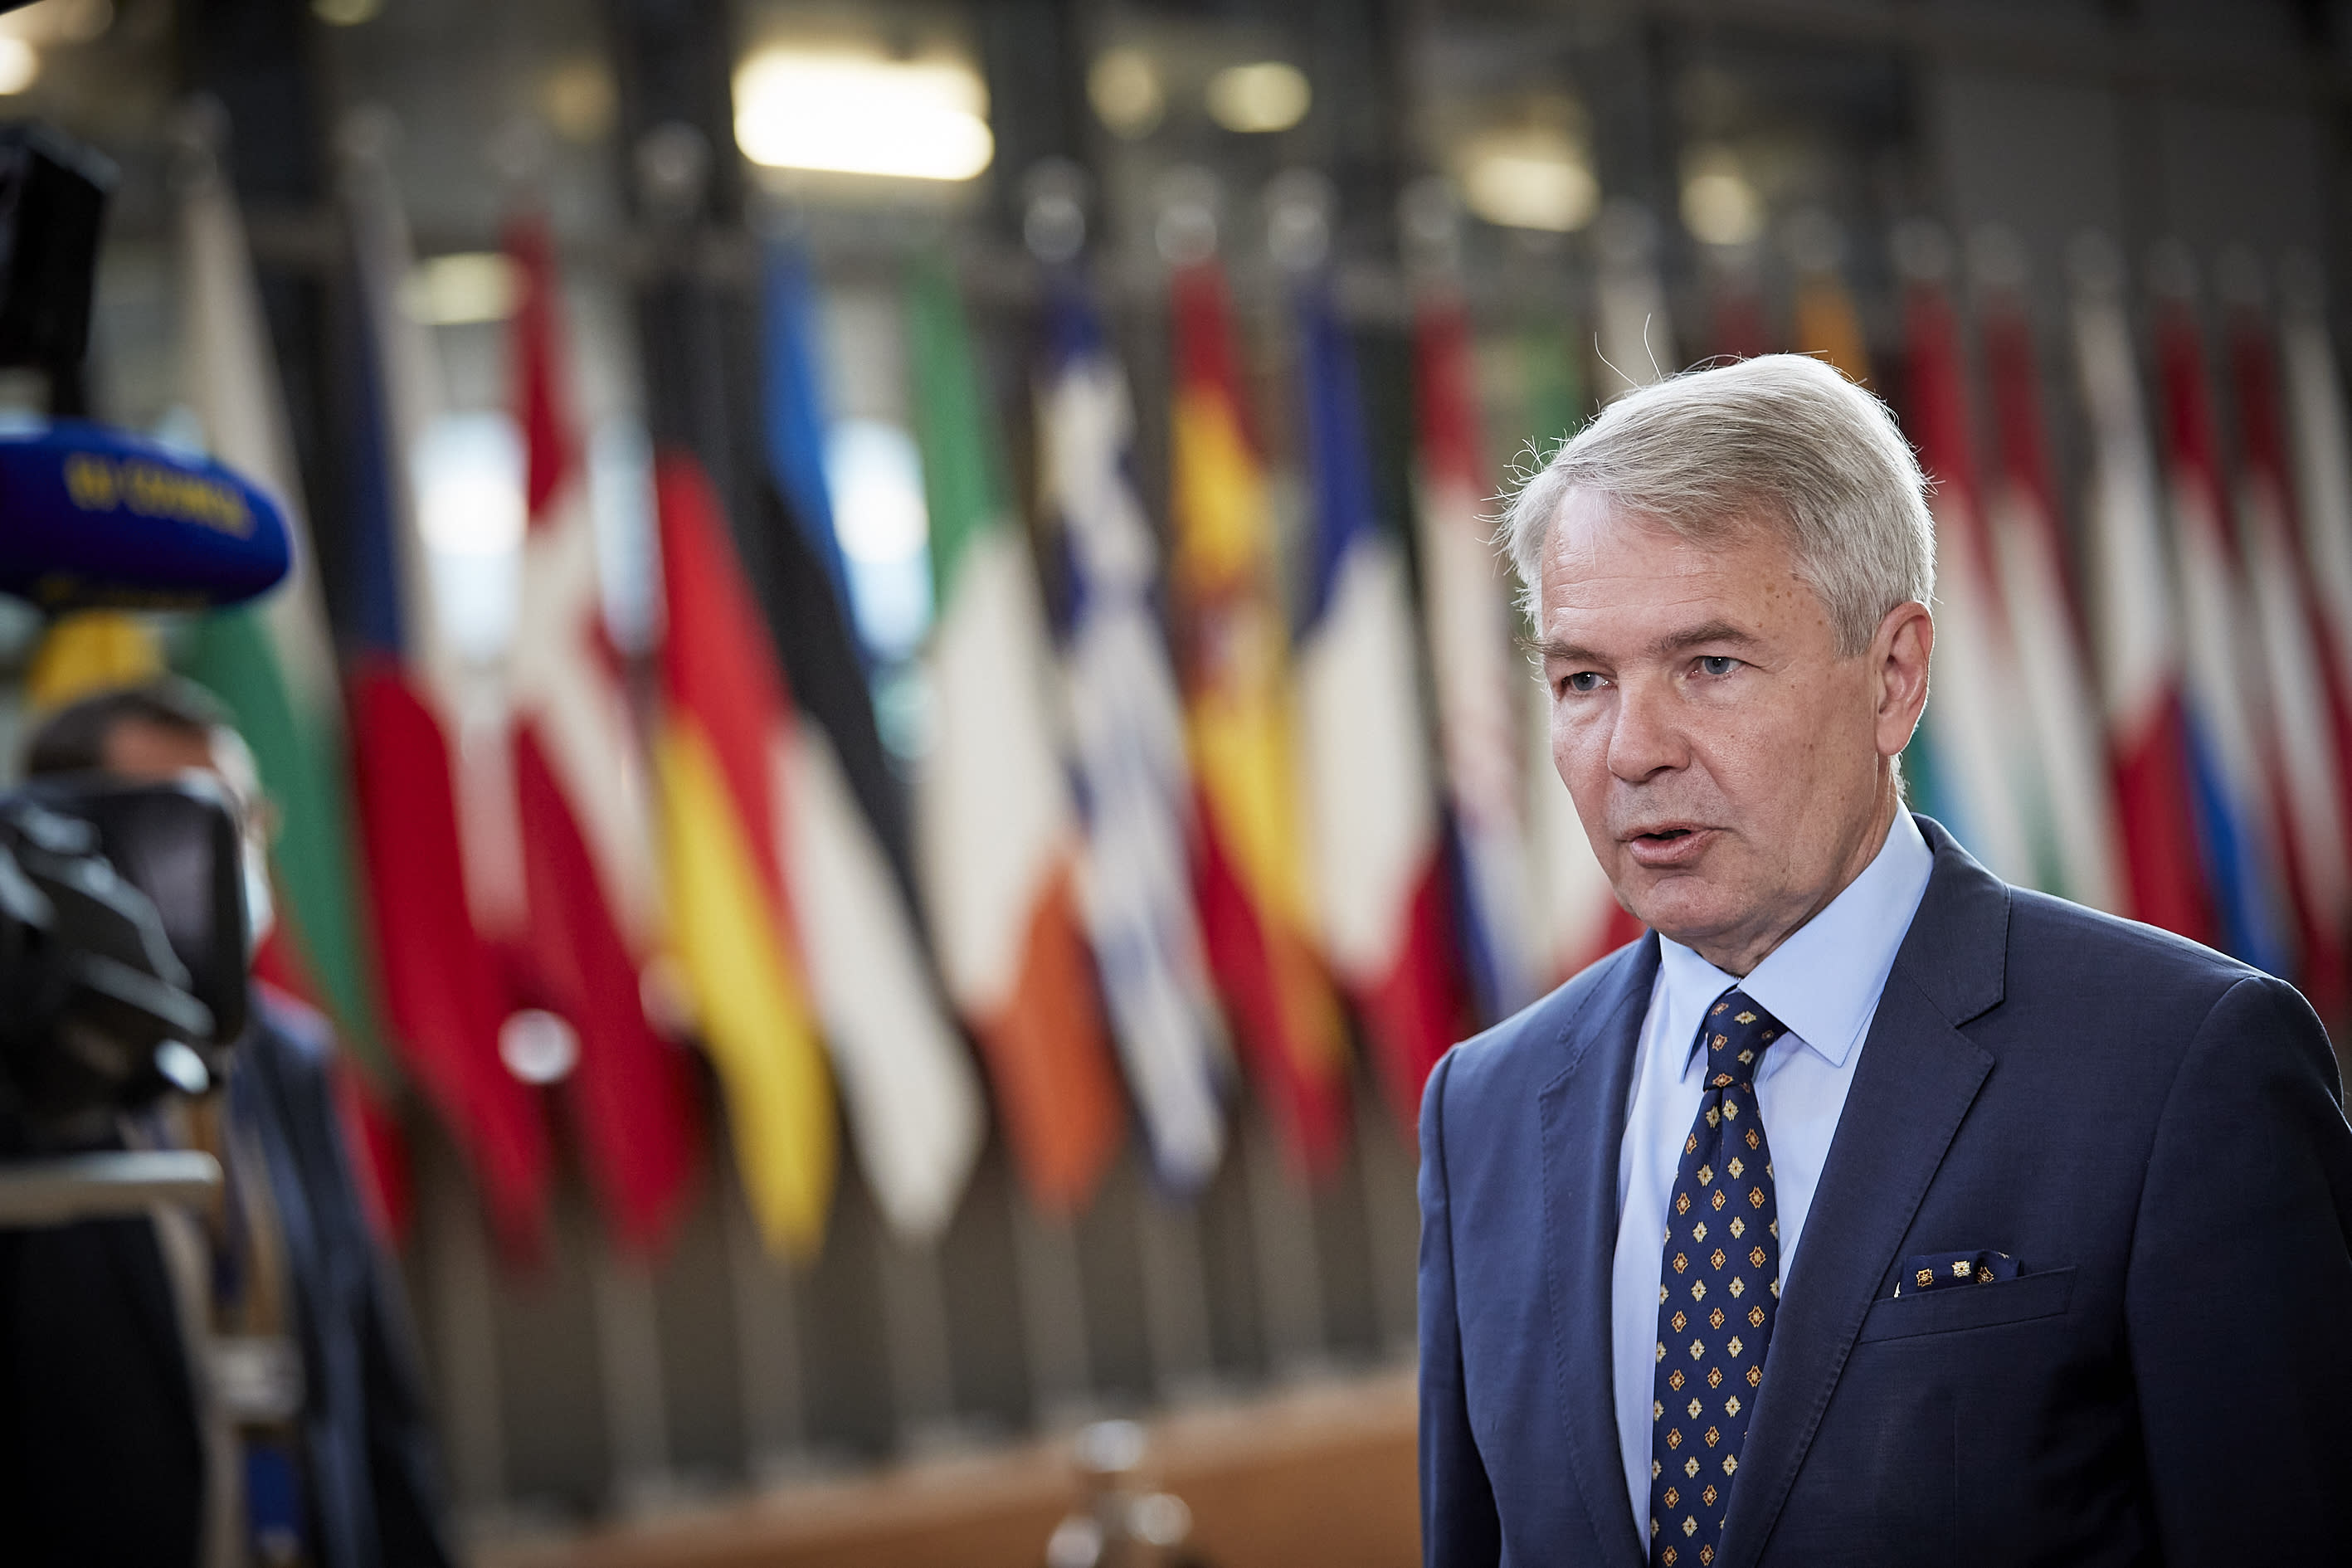 Finland has been appointed Chairman of the OSCE for 2025